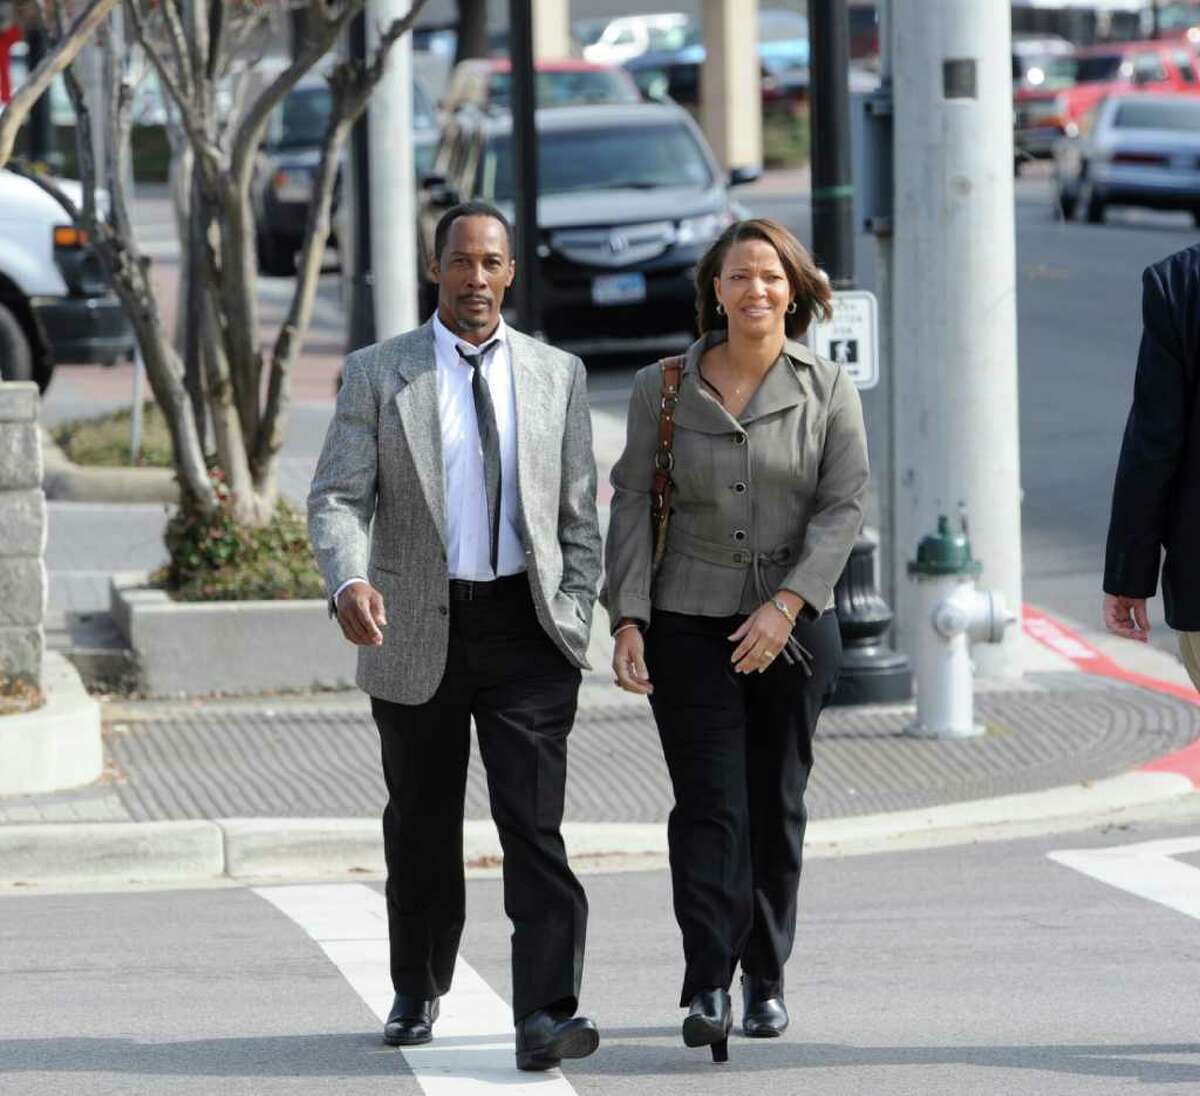 Calvin Walker, left, the Beaumont school district's electrician of record, and his wife Stacey, right, come back from lunch Monday afternoon December 12, heading to the main entrance of the Federal Courthouse. Walker is charged with fraud and overbilling the Beaumont Independent School District. Dave Ryan/The Enterprise